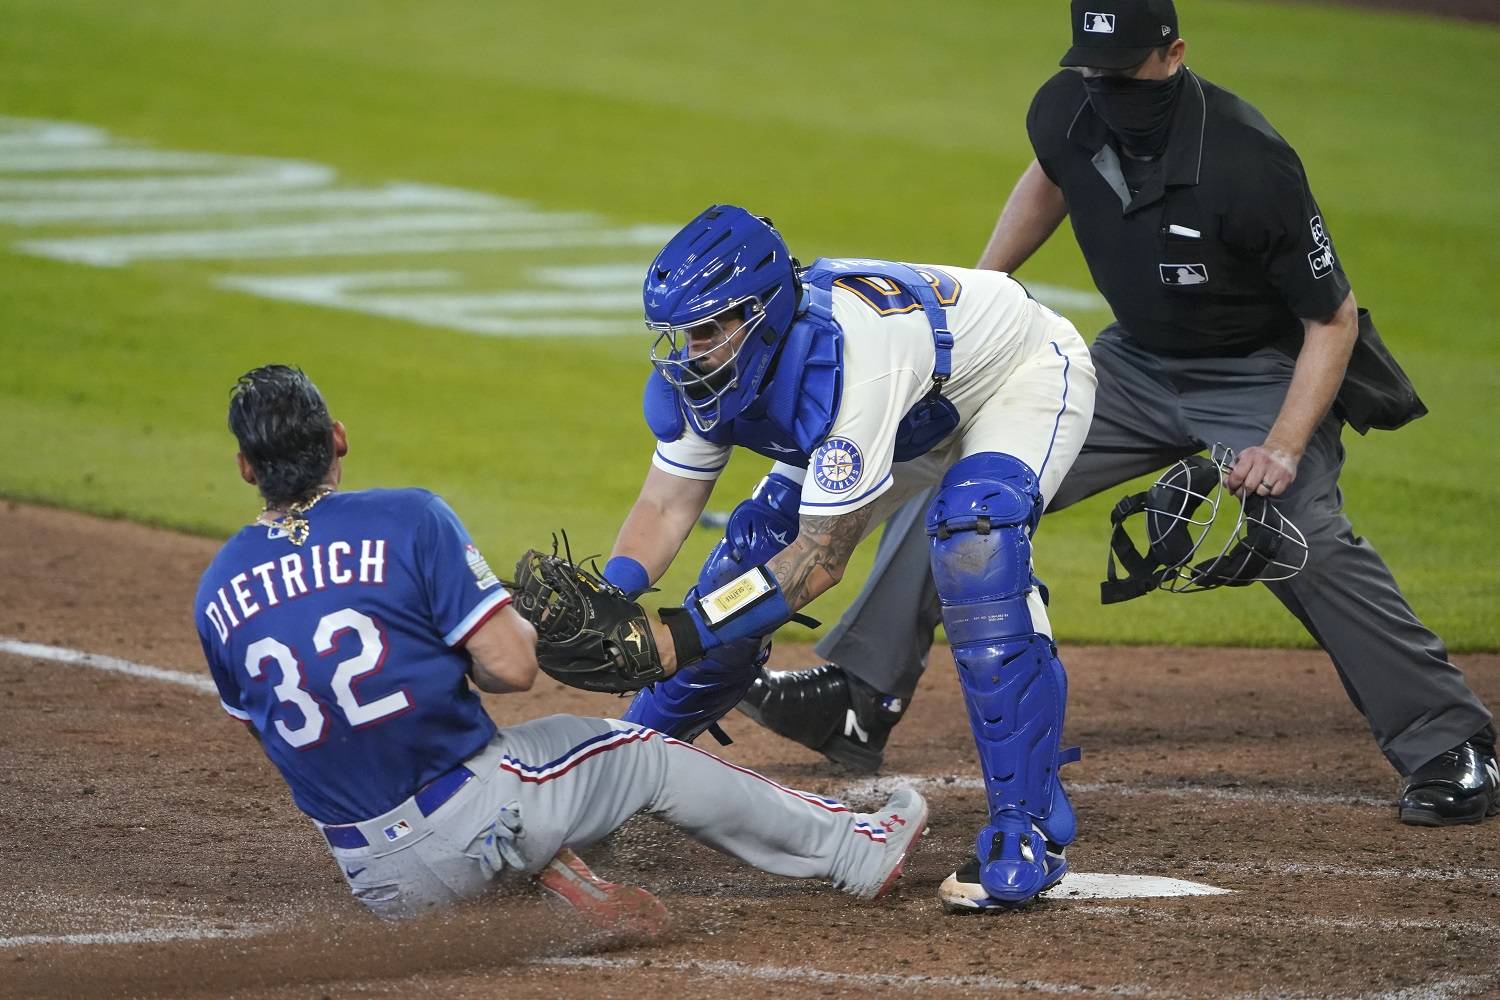 Seattle Mariners catcher Joseph Odom tags out Texas Rangers’ Derek Dietrich as home plate umpire Lance Barrett looks on during the seventh inning Sunday in Seattle. Dietrich was trying to score on a double hit by Leody Taveras. (Ted S. Warren/The Associated Press)